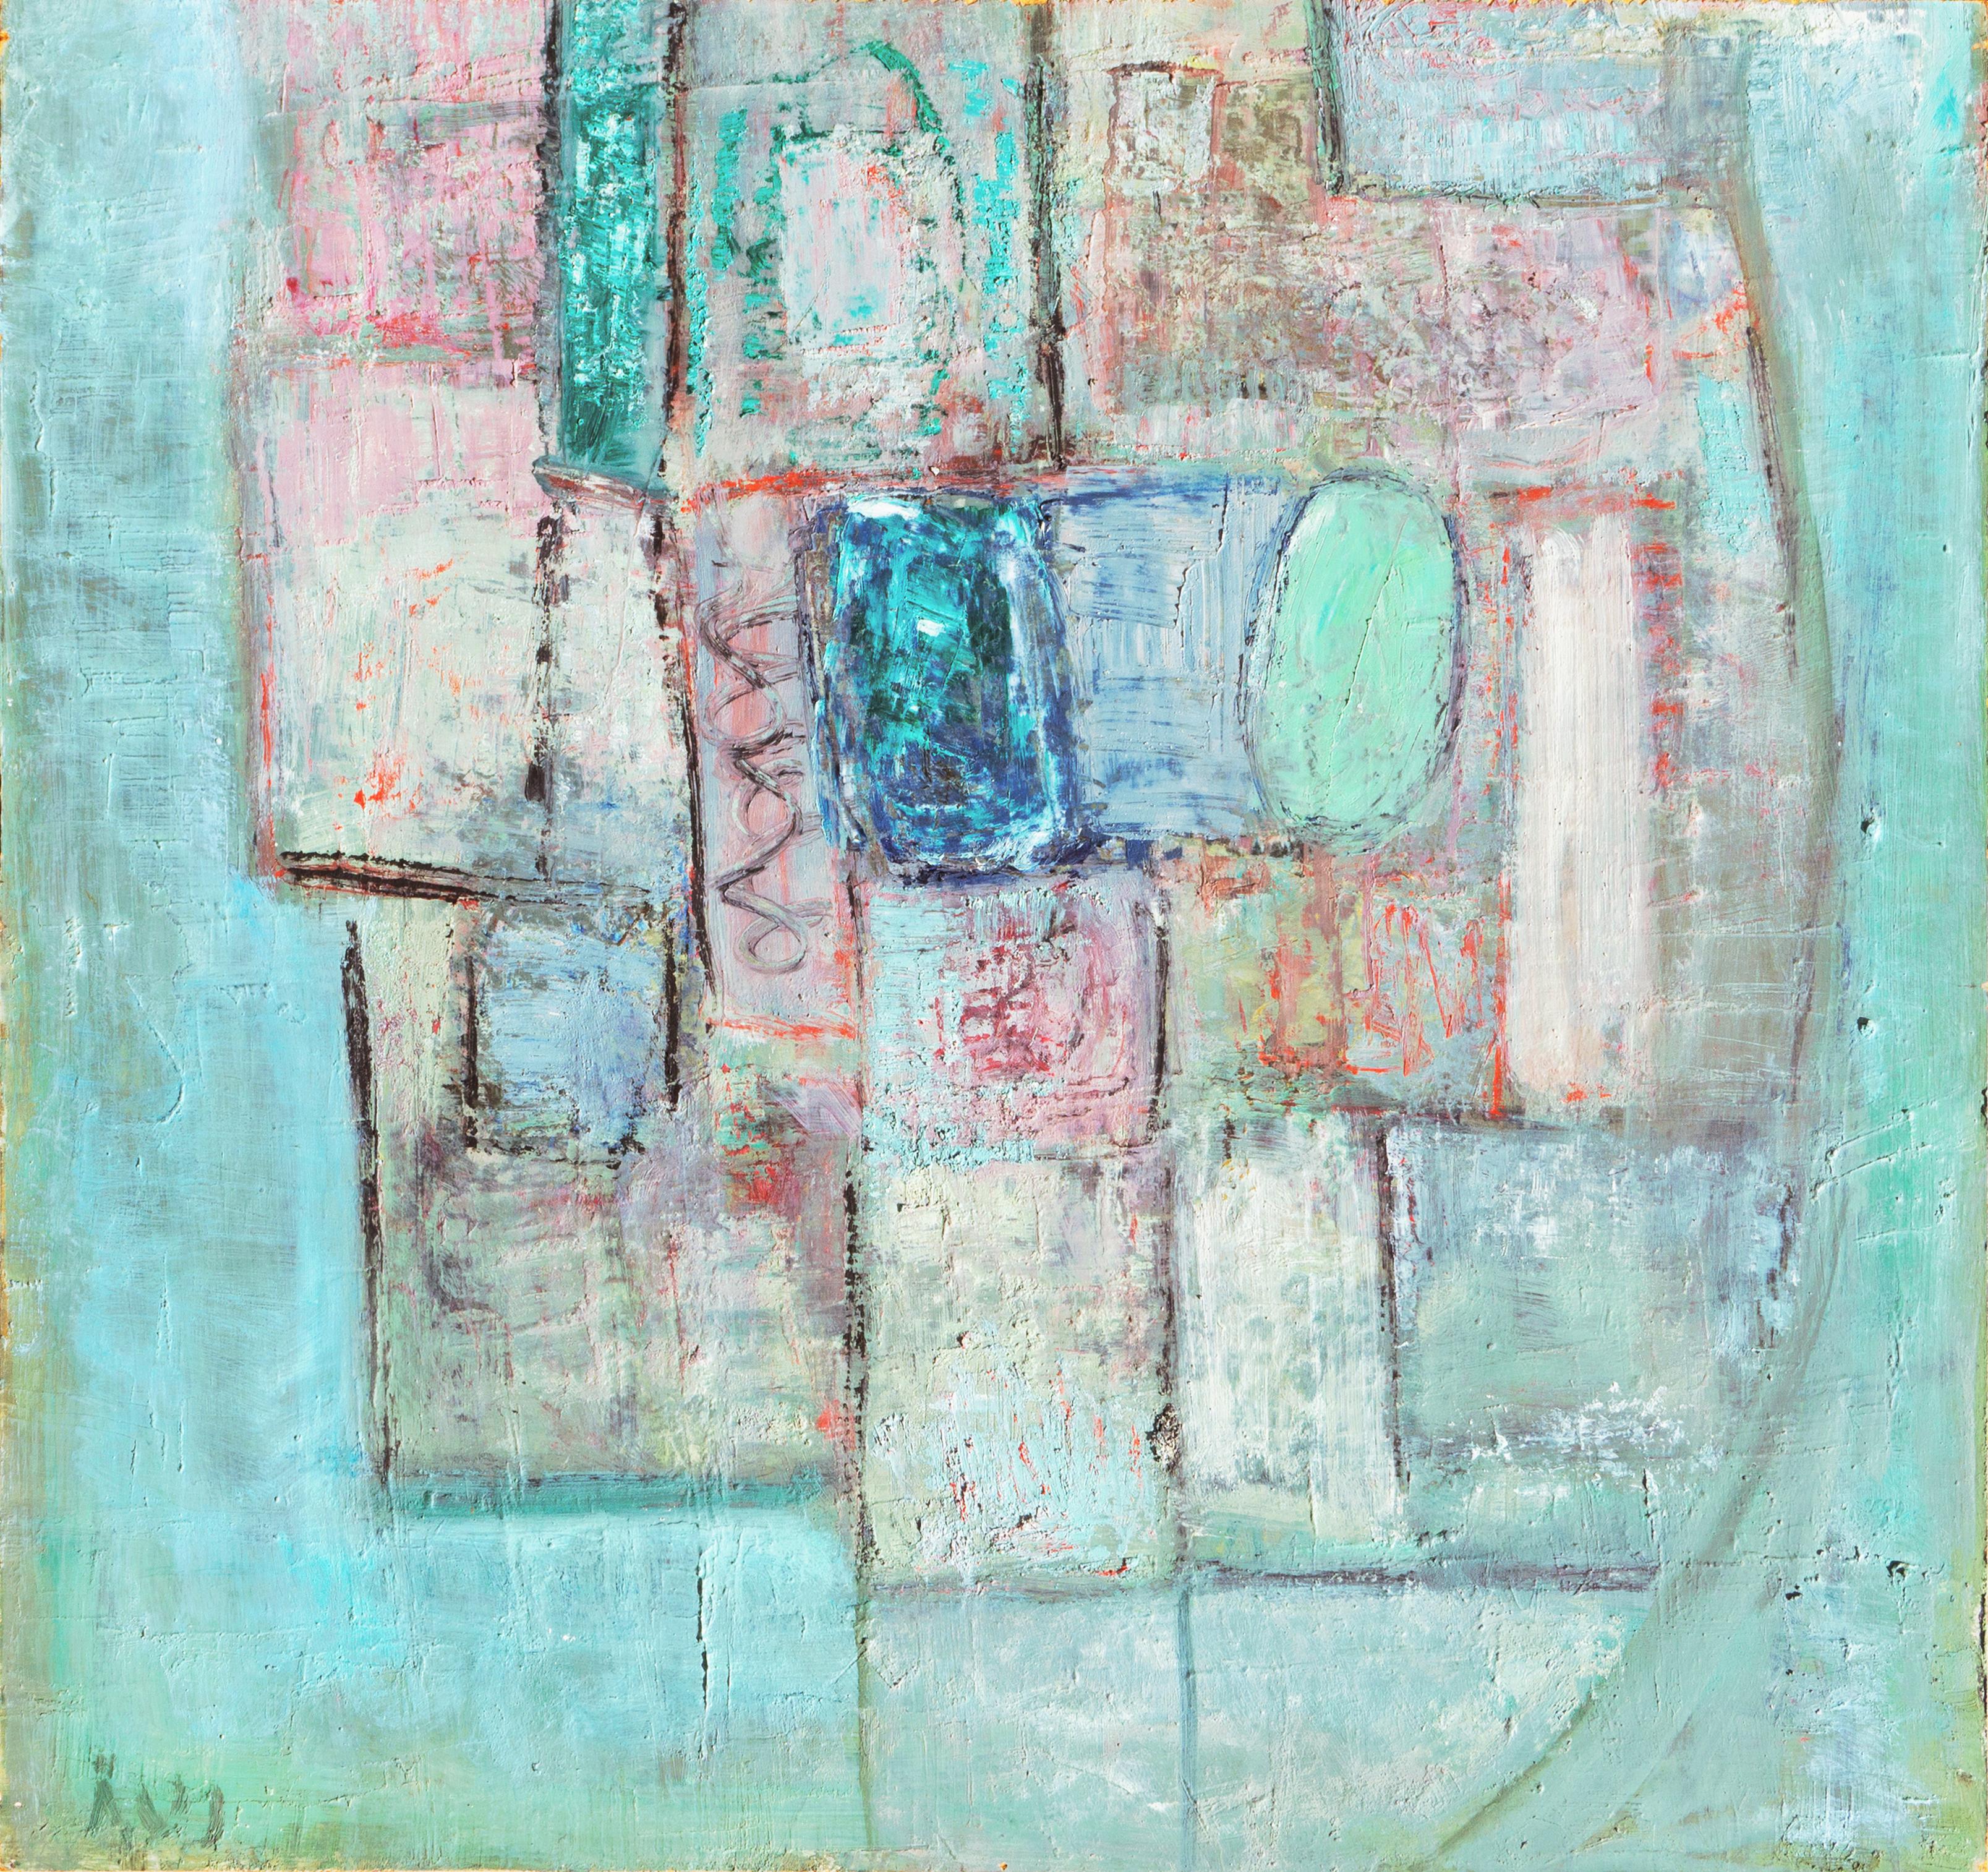 Aage Vogel-Jorgensen Abstract Painting - 'Abstract, Turquoise and Rose', Paris Modernist, Guggenheim, Benezit, Italy